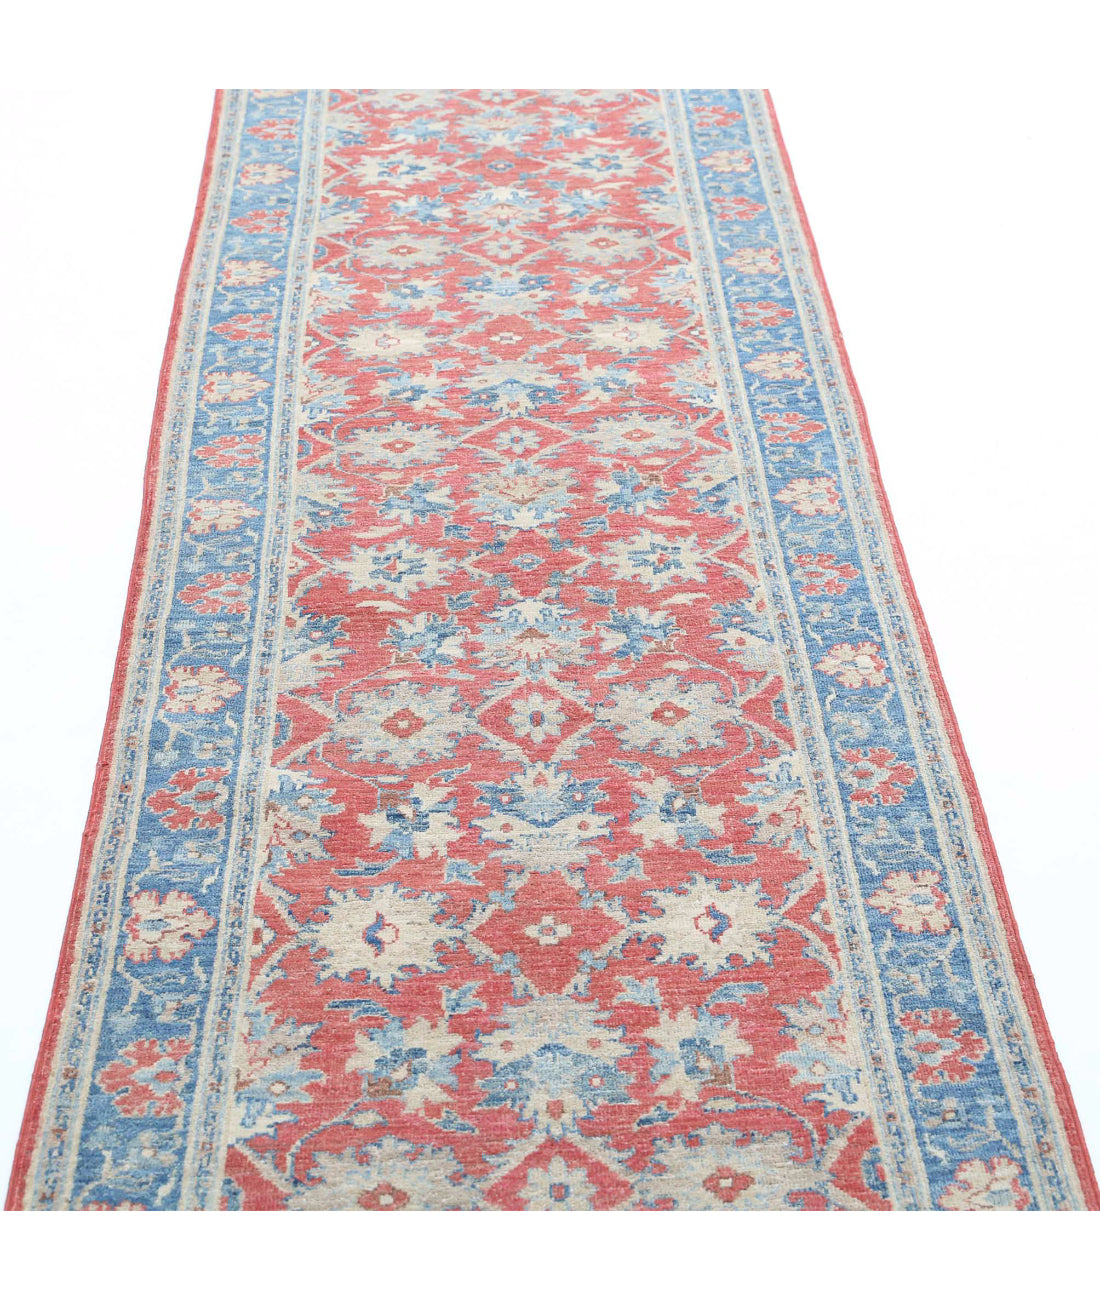 Ziegler 2'6'' X 9'10'' Hand-Knotted Wool Rug 2'6'' x 9'10'' (75 X 295) / Red / Blue